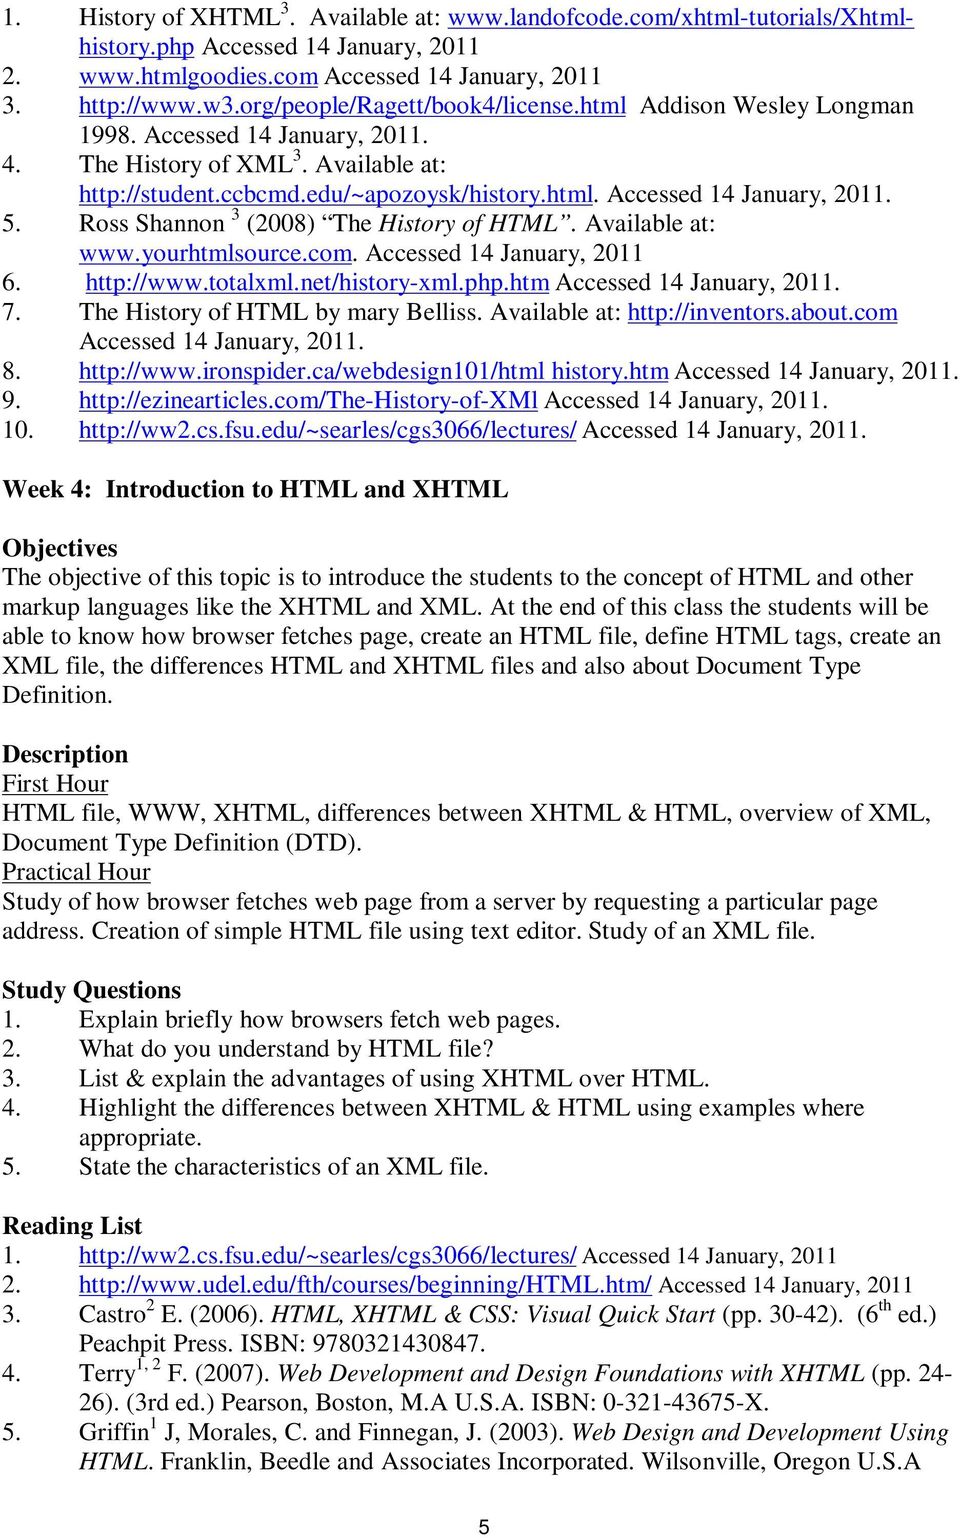 Ross Shannon 3 (2008) The History of HTML. Available at: www.yourhtmlsource.com. Accessed 14 January, 2011 6. http://www.totalxml.net/history-xml.php.htm Accessed 14 January, 2011. 7.